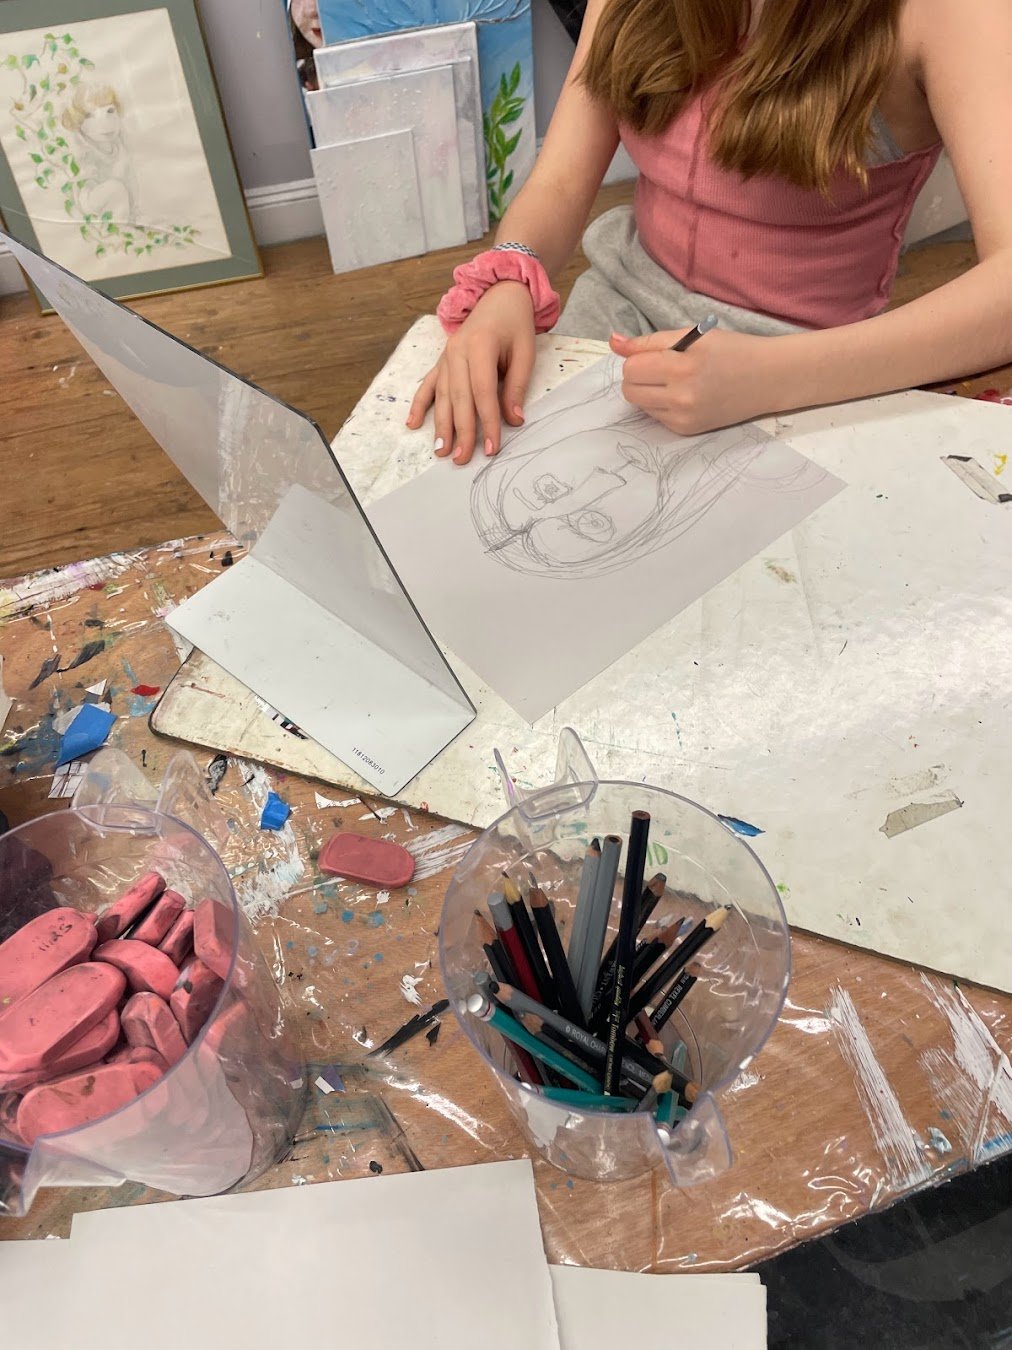 weekly art classes for teens near me